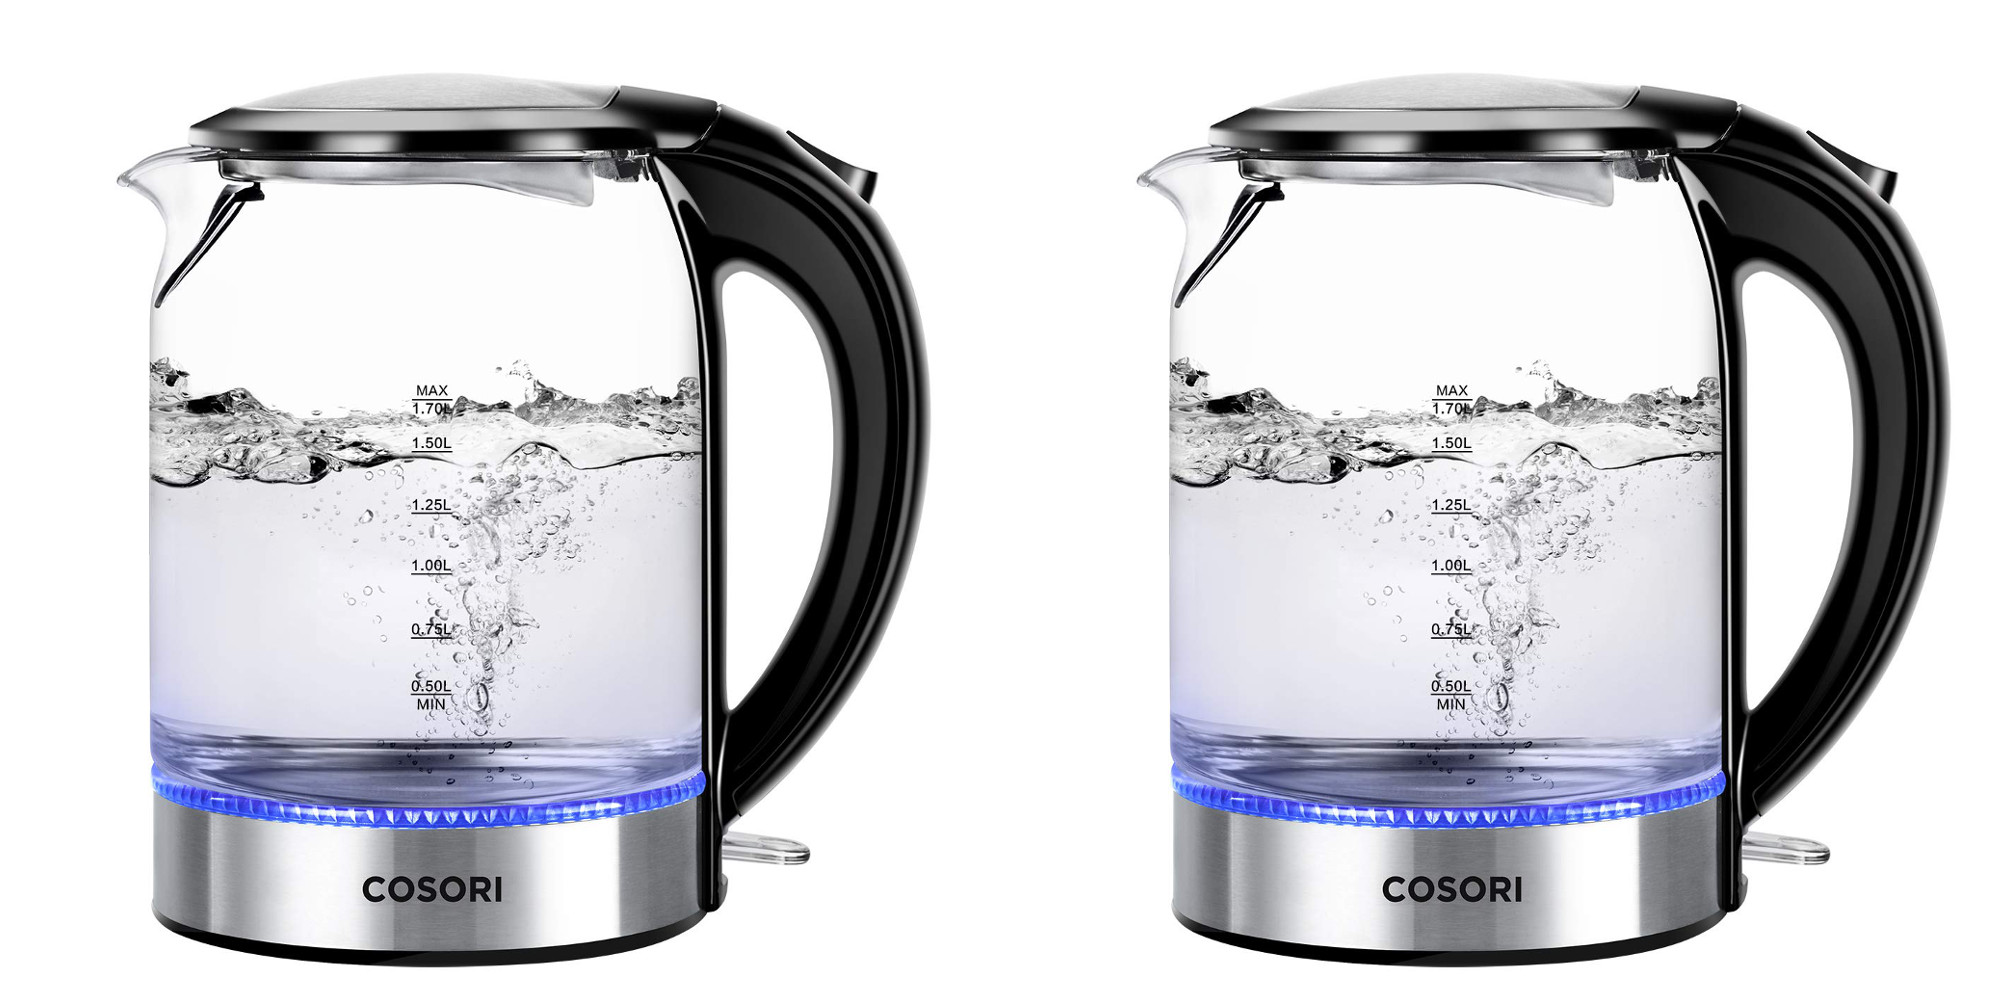 COSORI's glass/stainless steel kettle with LED lighting now 25% off at $30